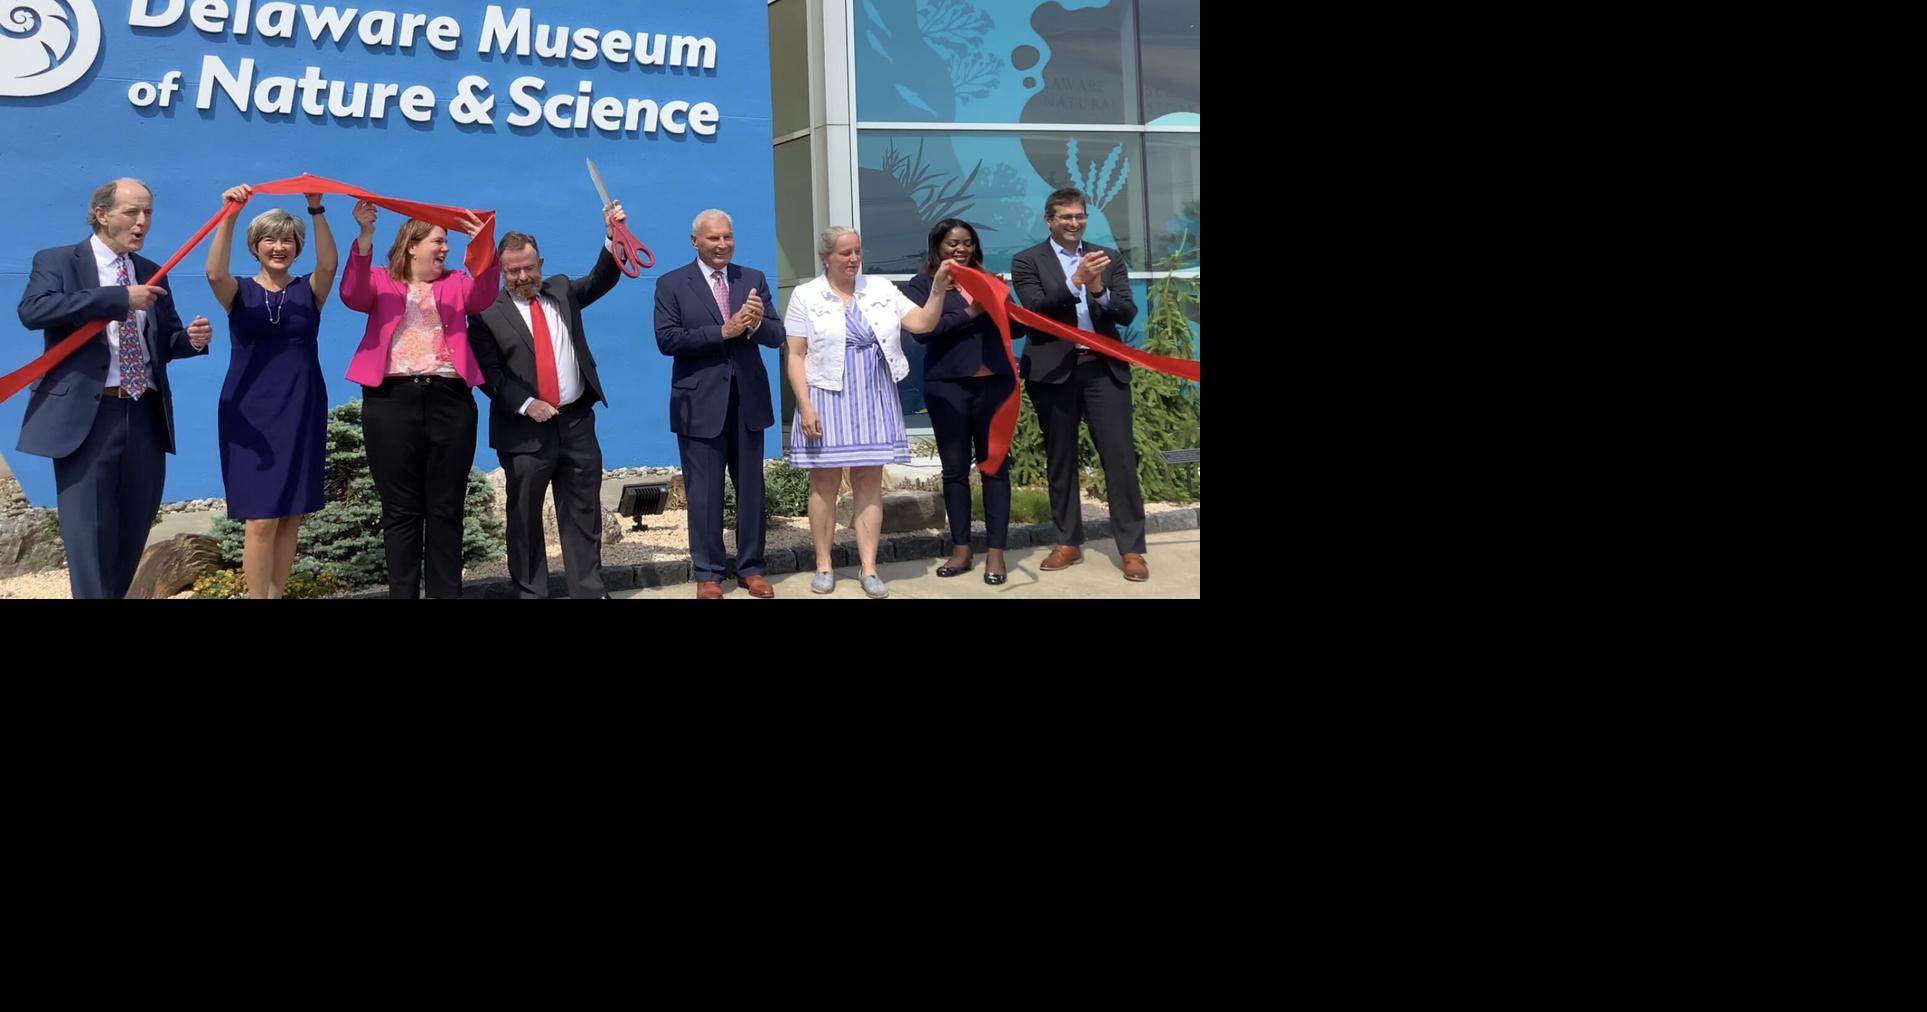 ‘A labor of love’ | Revamped Delaware Museum of Nature and Science opens its doors to the public again